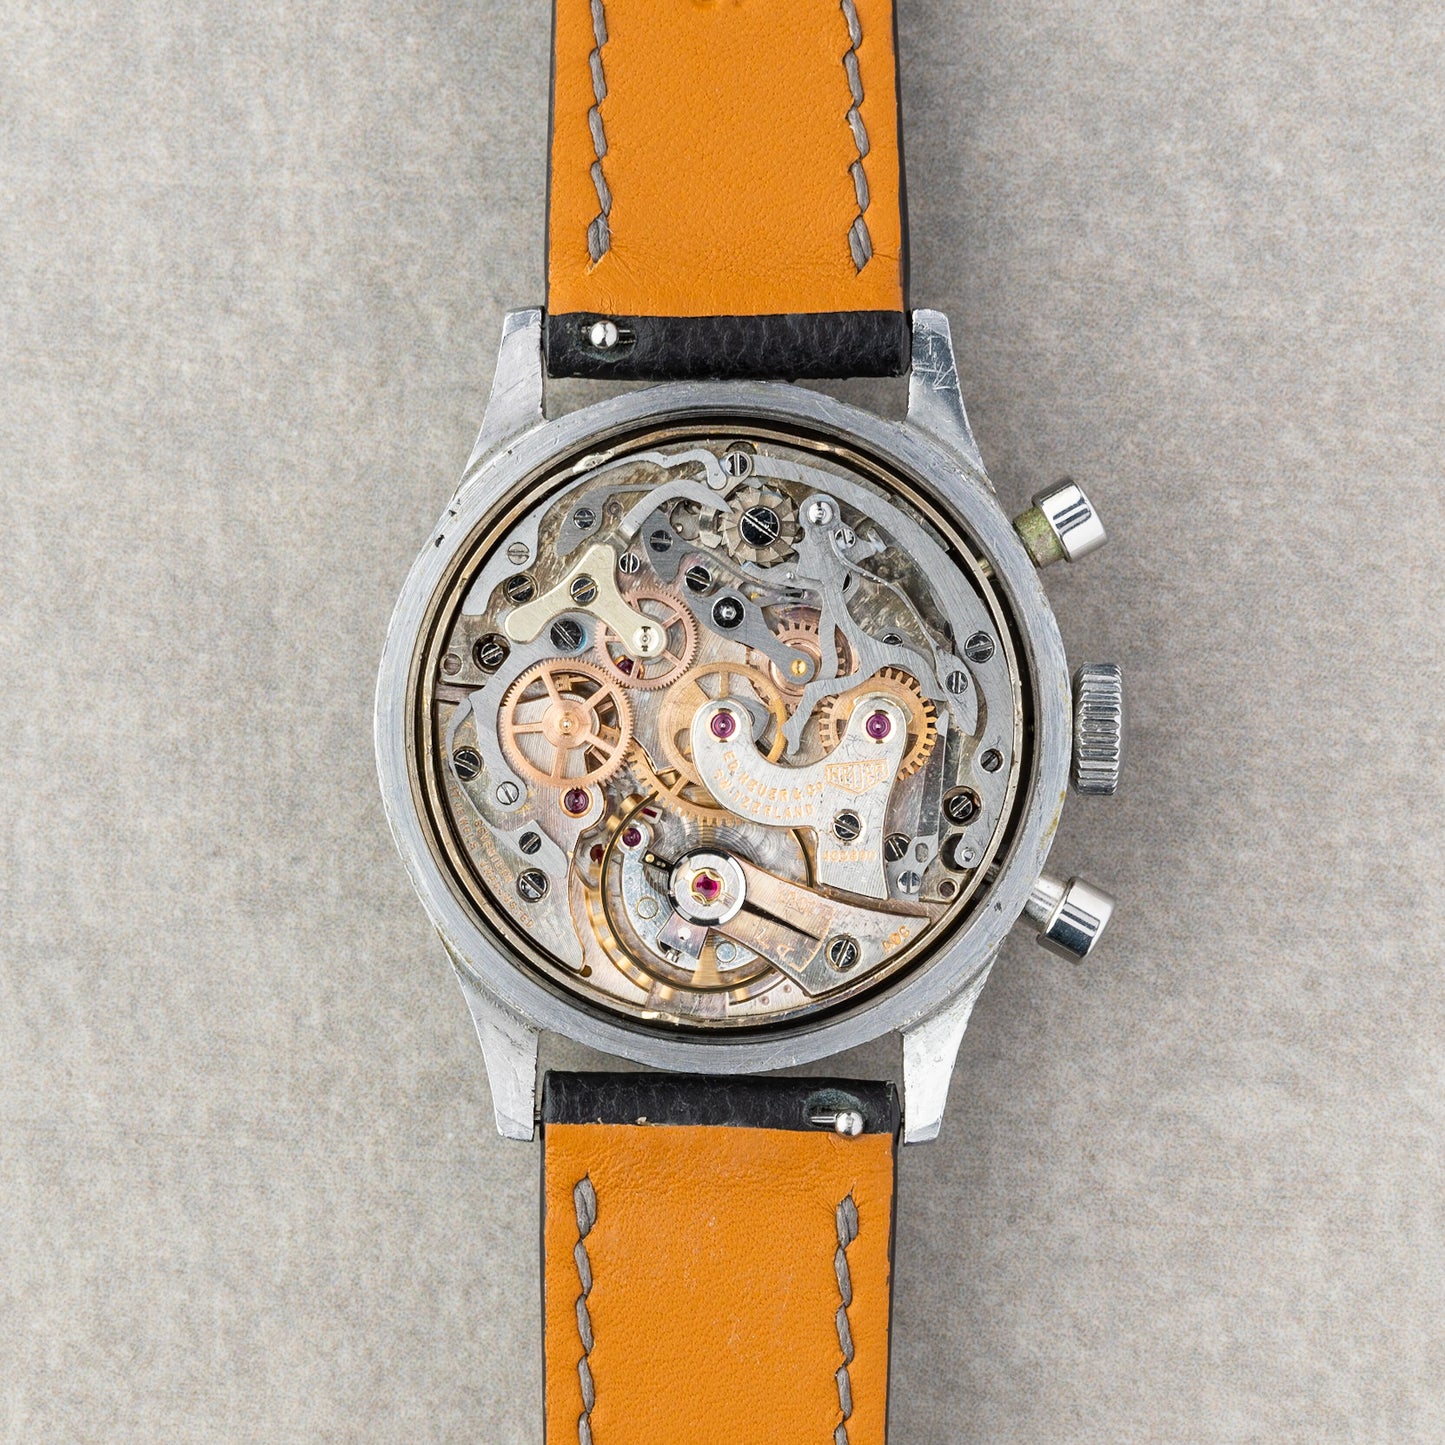 1940s Heuer Big Eyes Chronograph Ref. 59818 With Salmon Dial